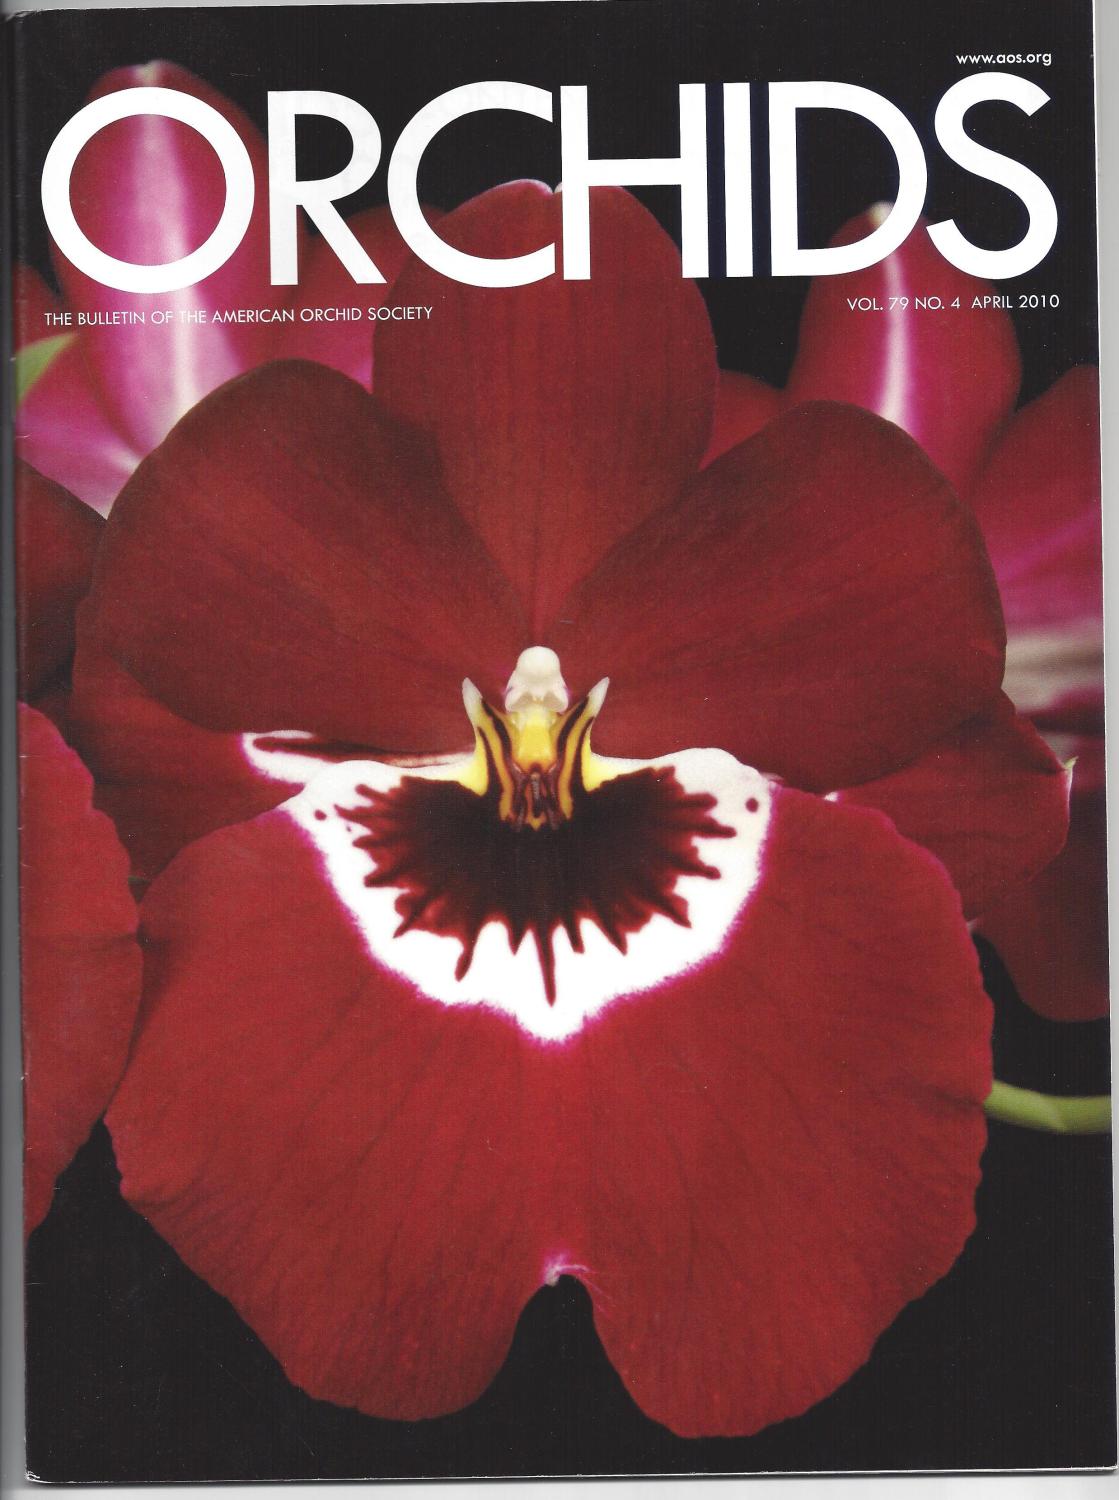 Orchids The Bulletin of the American Orchid Society Vol. 79 No. 4 April, 2010